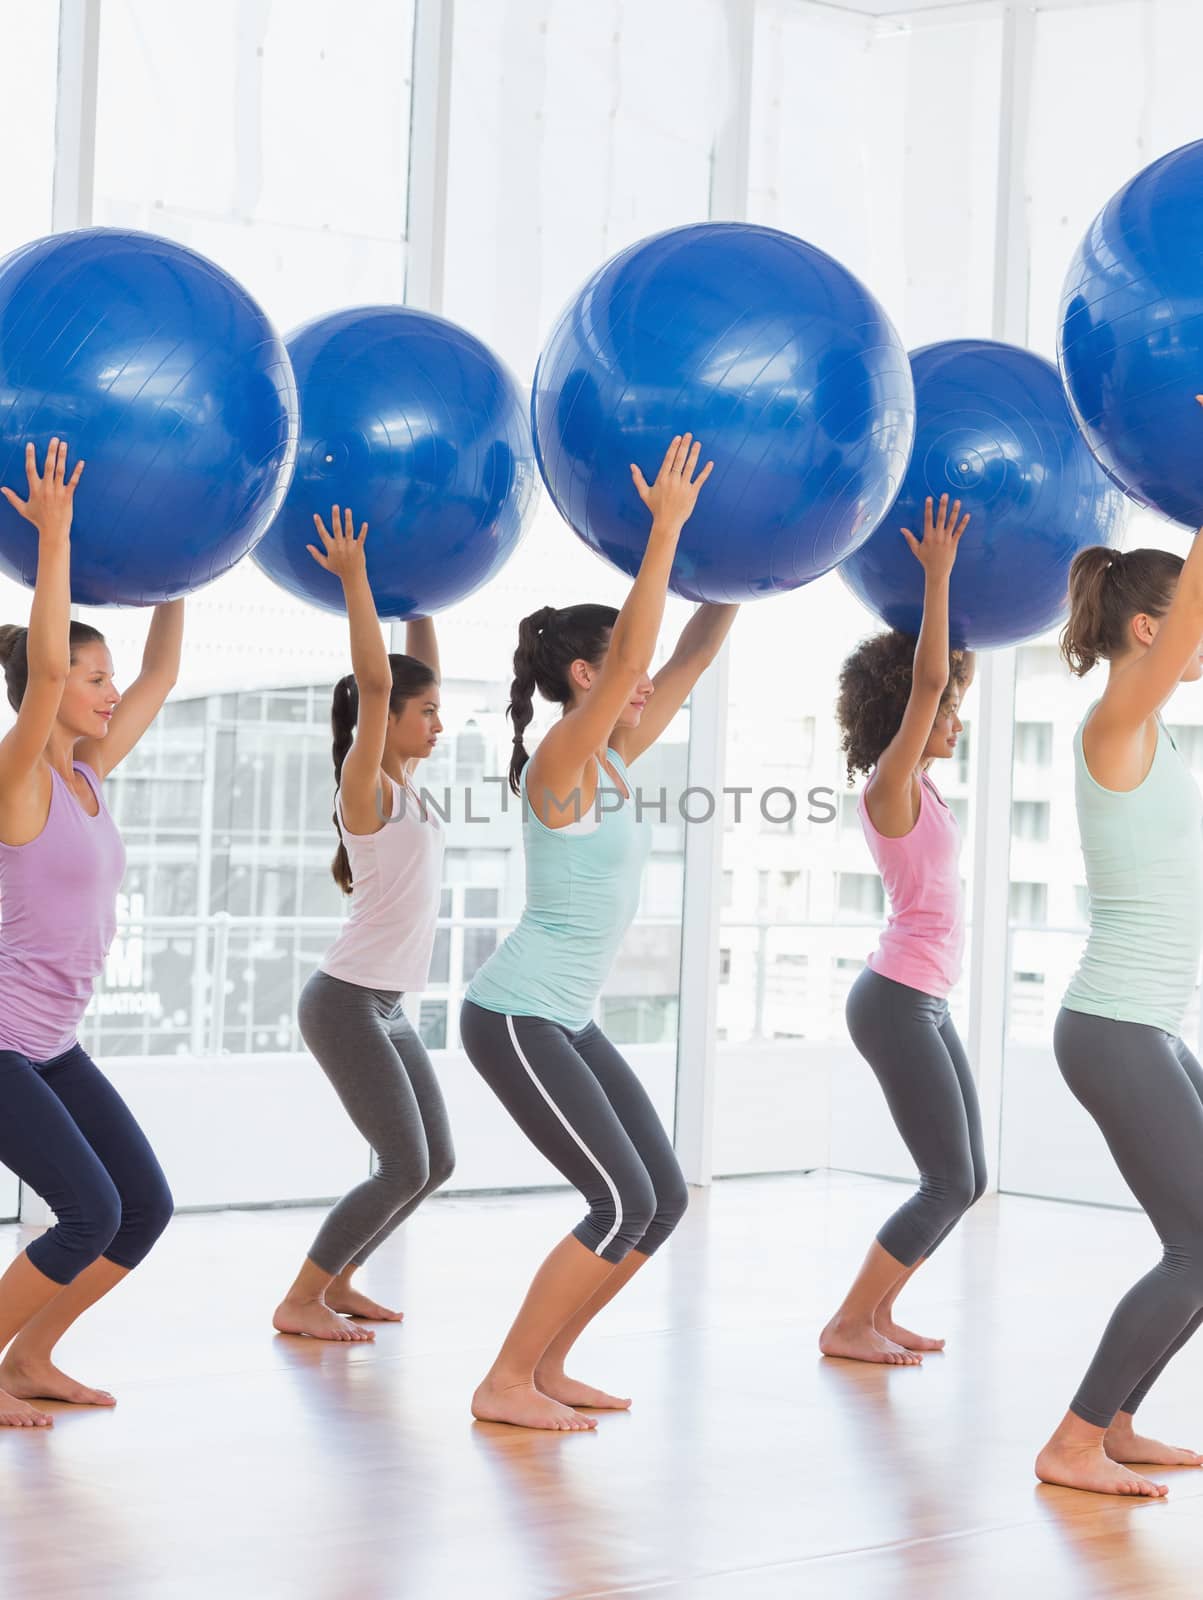 Fit women holding blue fitness balls in exercise room by Wavebreakmedia